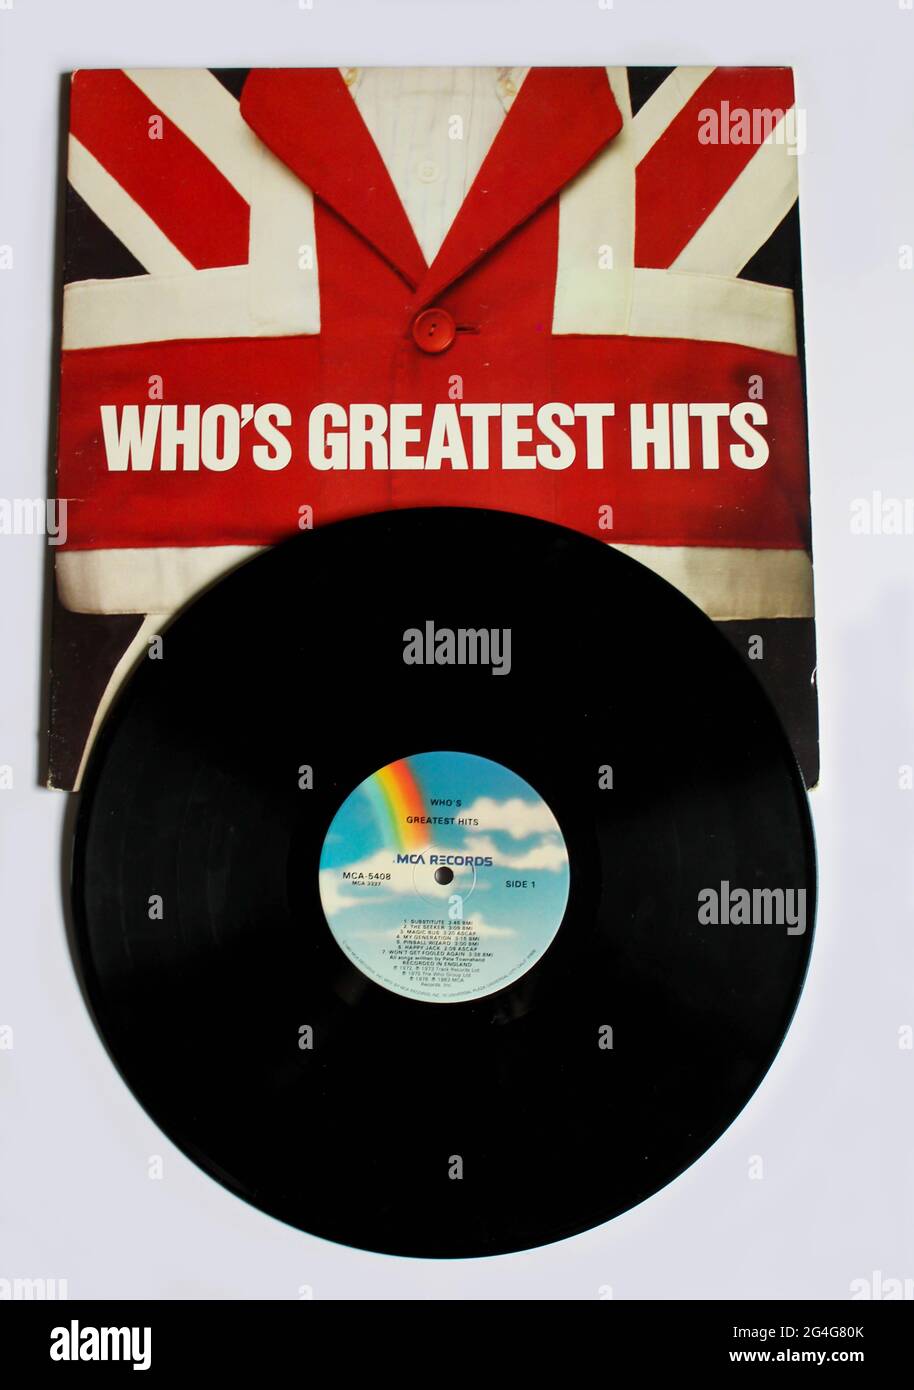 English Rock and hard rock band, The Who music album on vinyl record LP disc. Titled: Who's Greatest Hits album cover Stock Photo